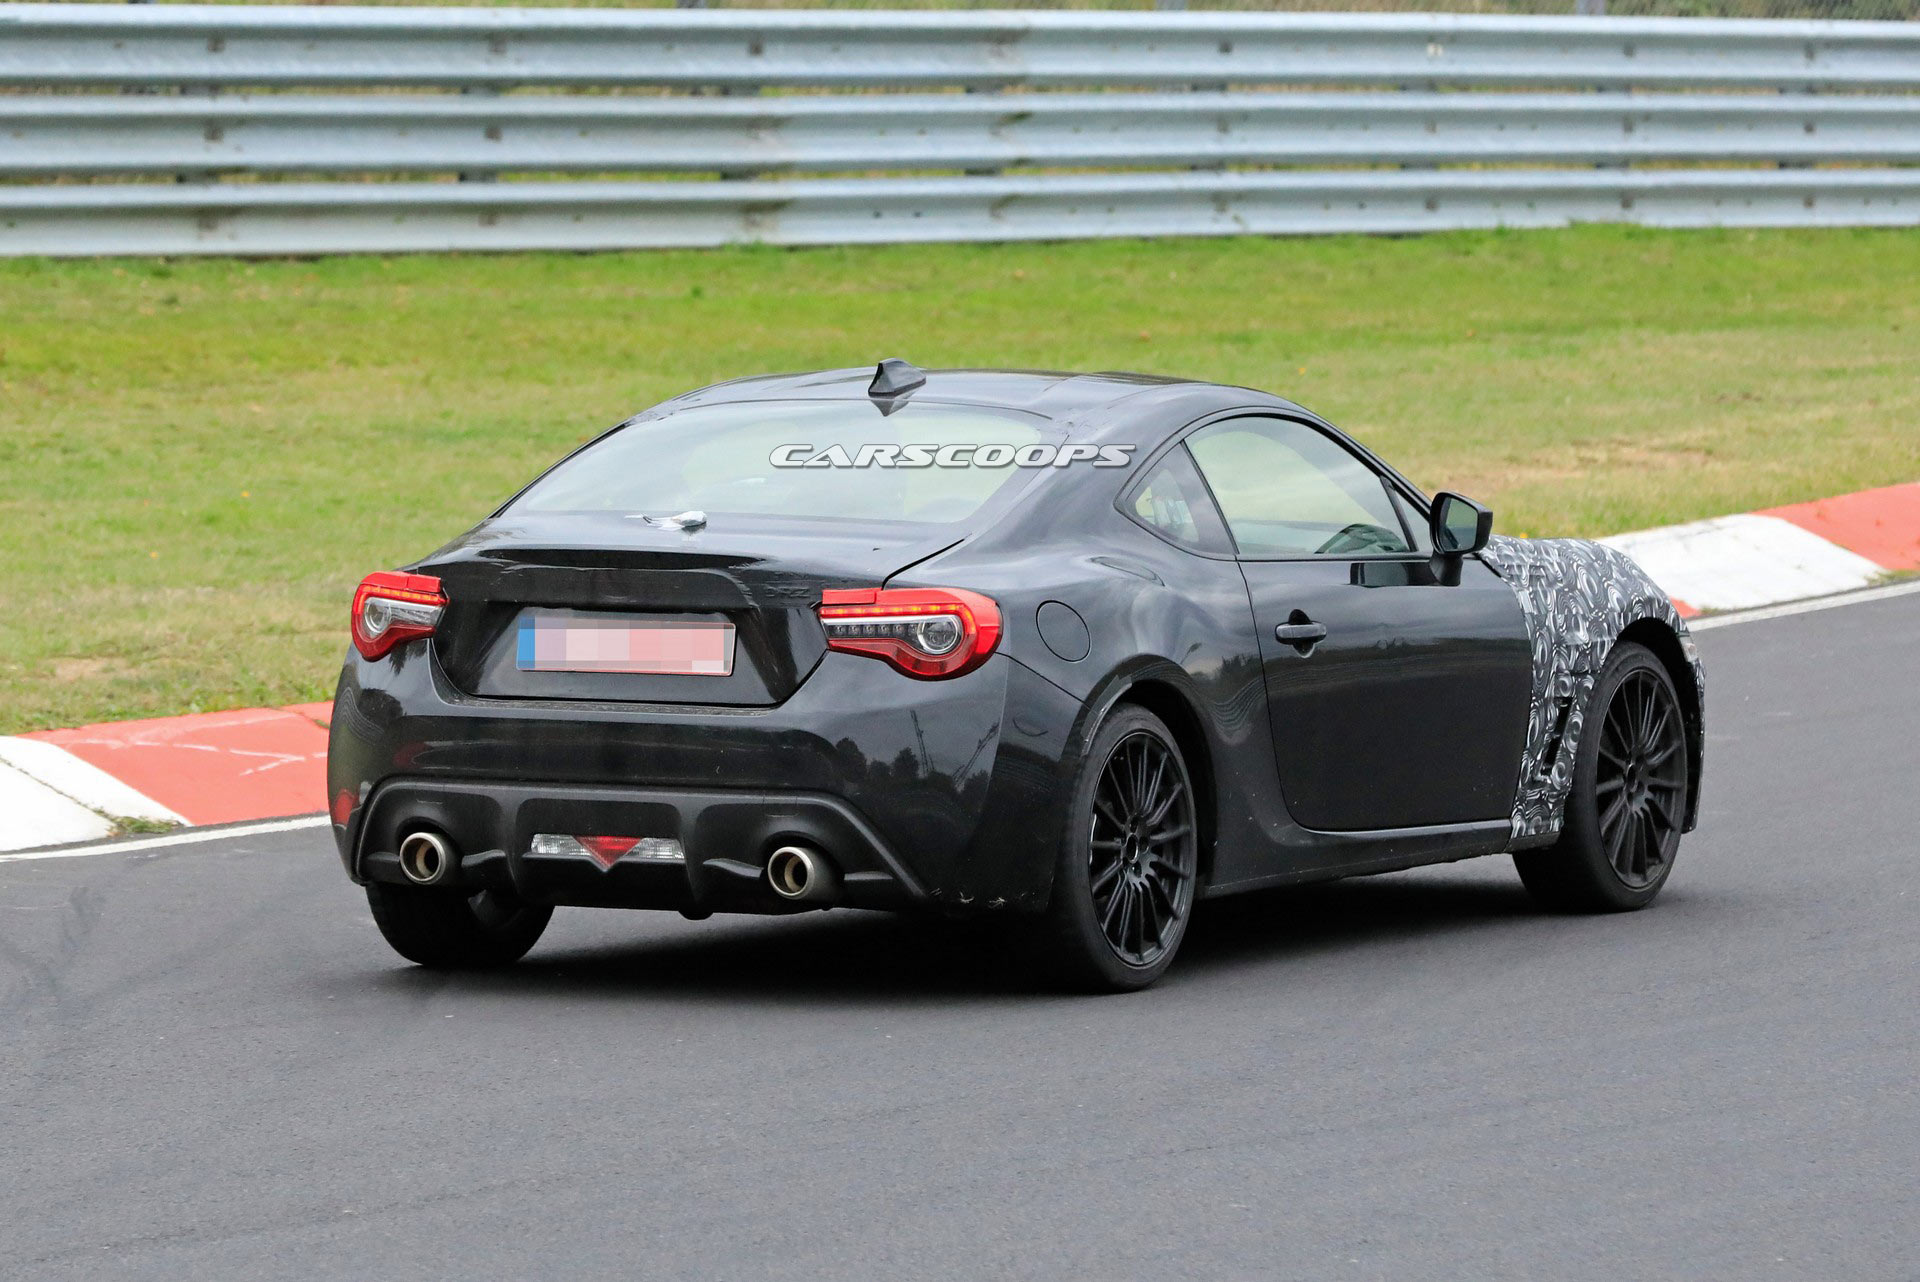 2021 Brz Subaru Appears To Be Working On One Last Facelift